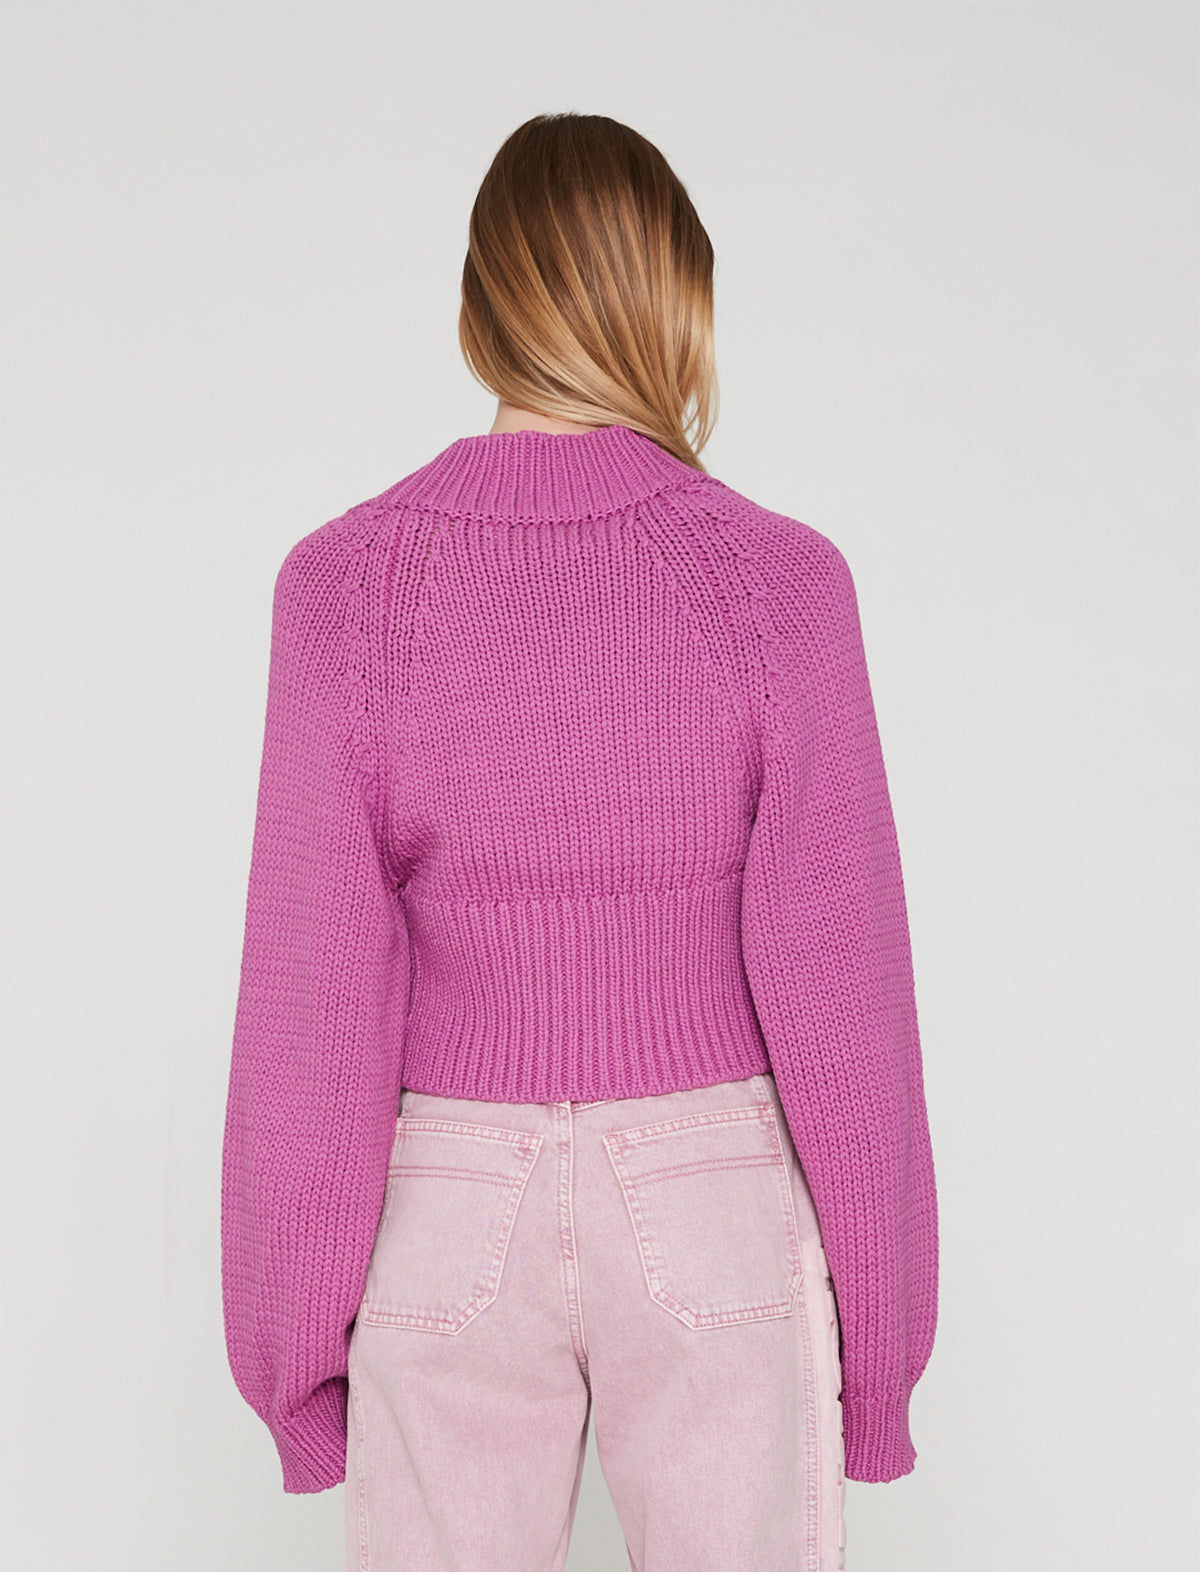 ROTATE Birger Christensen Gracelyn Knit Cardigan in Meadow Mauve